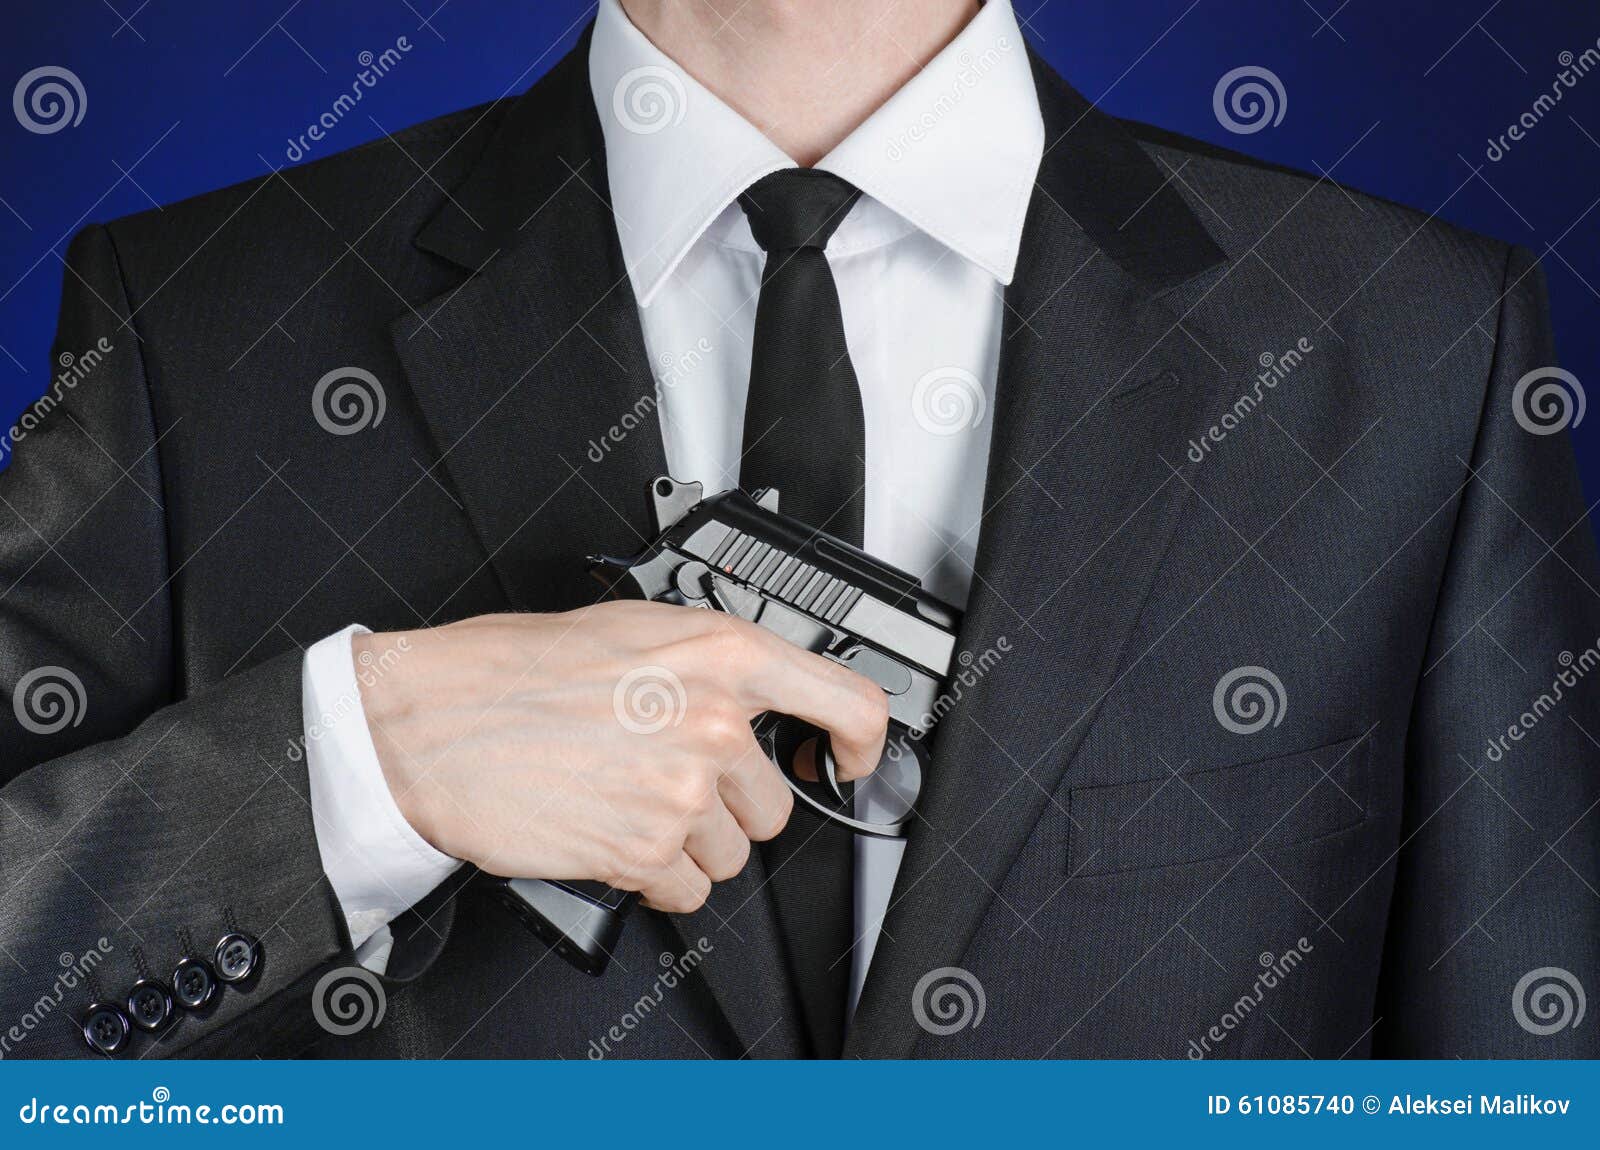 firearms and security topic: a man in a black suit holding a gun on a dark blue background in studio 